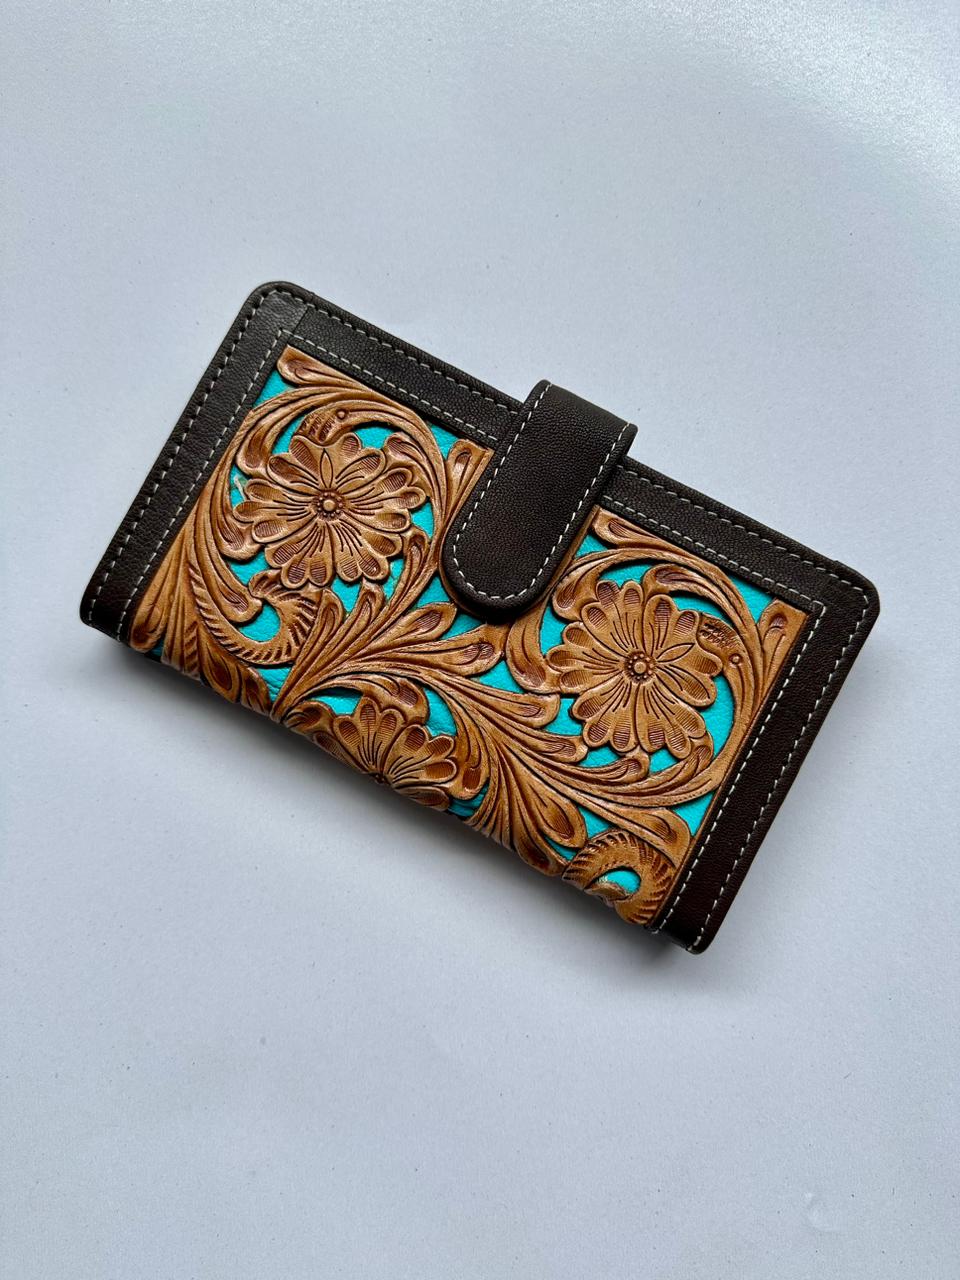 The Design Edge Tooling Leather Carved Clutch Wallet with Turquoise Base